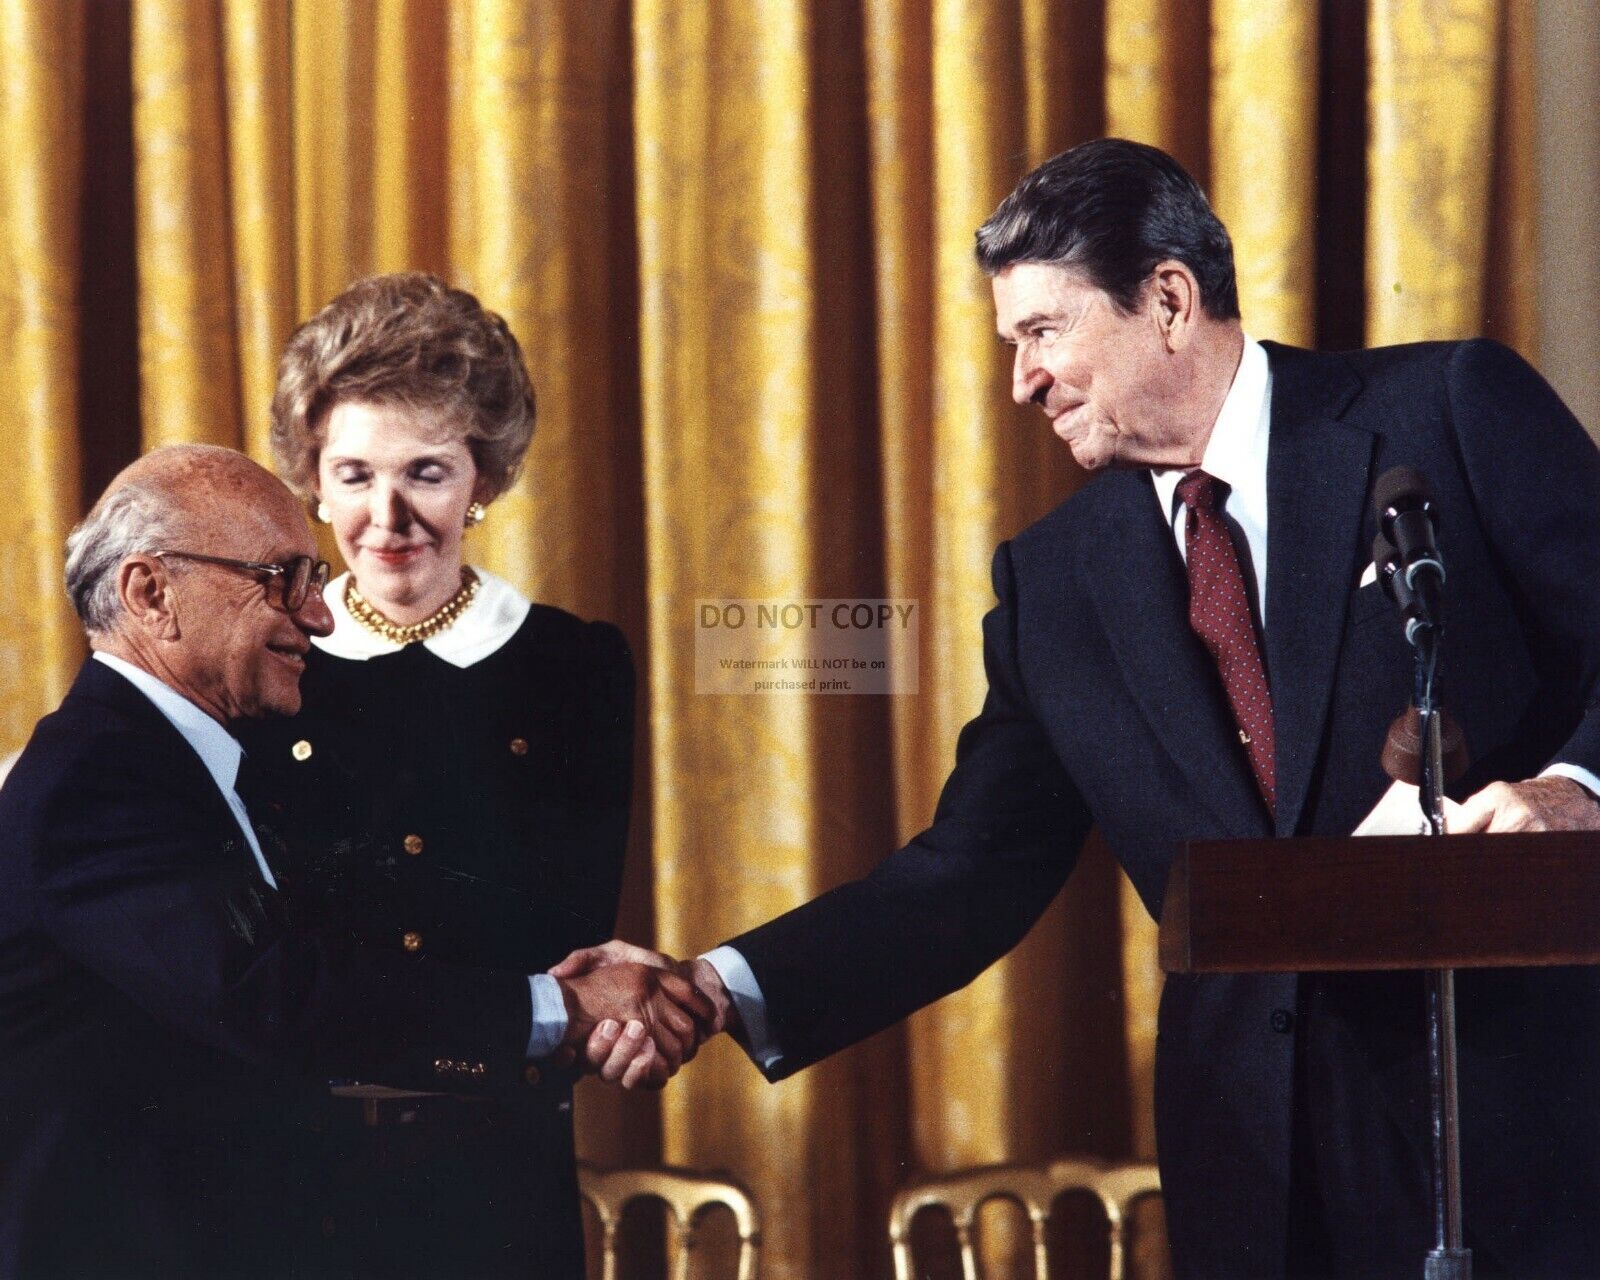 MILTON FRIEDMAN GETS PRESIDENTIAL MEDAL FROM RONALD REAGAN - 8X10 PHOTO (AA-003)